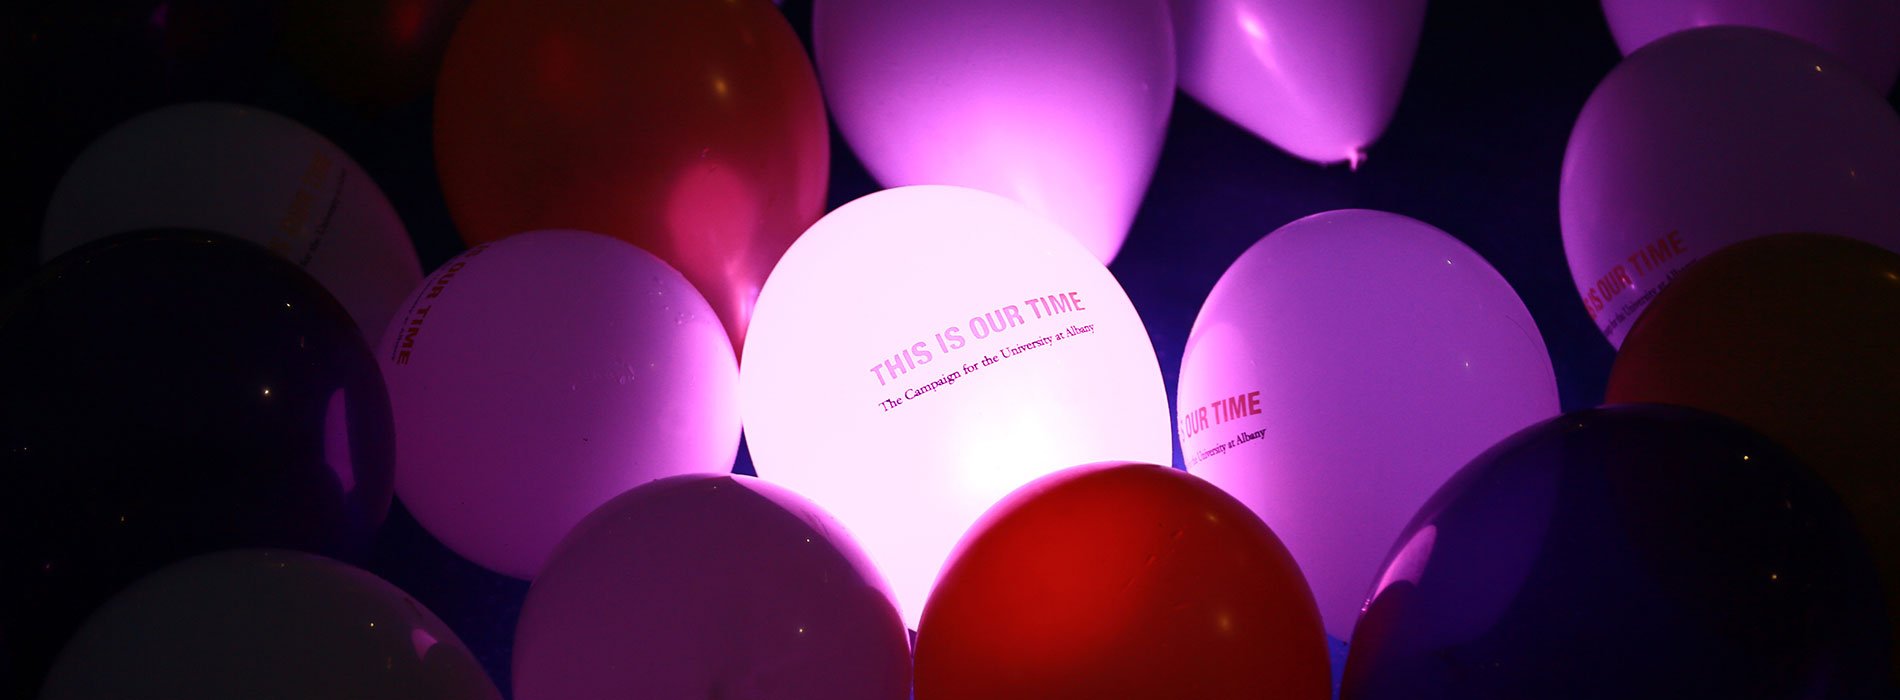 Glowing purple balloons from the campaign kick off celebration.